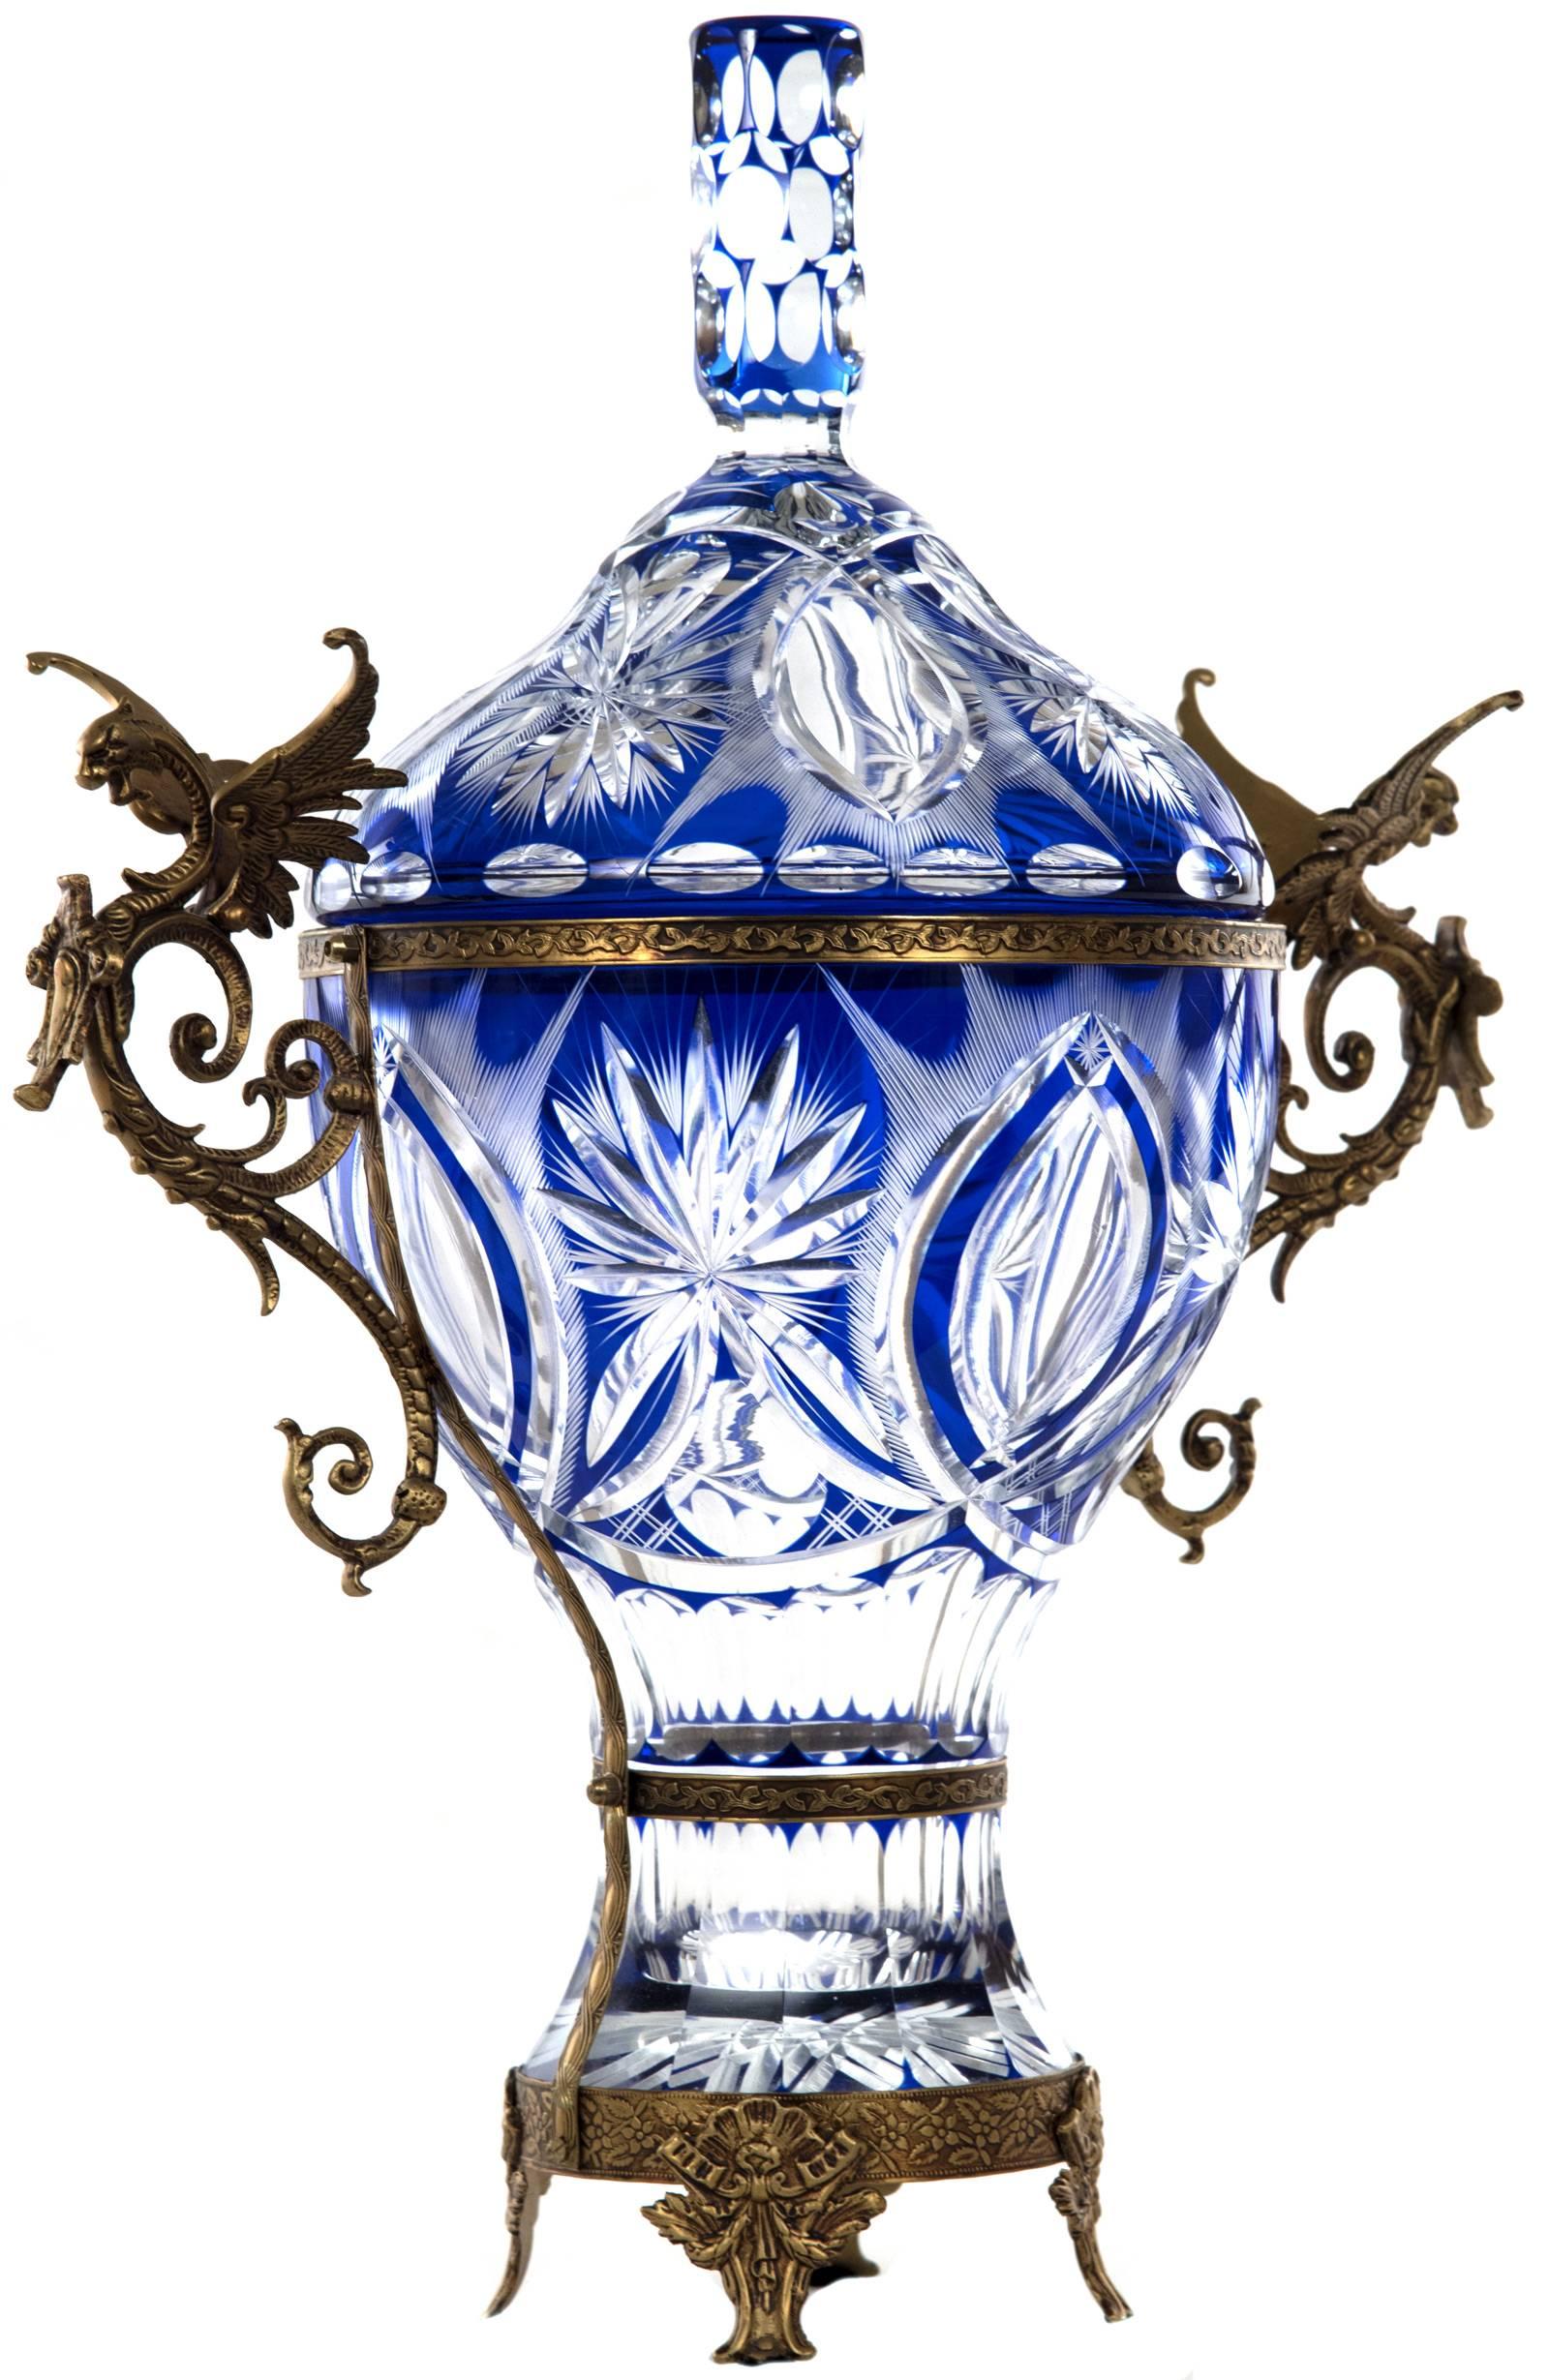 A large 20th century bronze mounted cobalt cut to clear crystal urn having a foliate decorated bronze rim mounted to each side with finely detailed figural Wyvern handles. The body of the urn is cut to depict oval sunbursts and star cut geometric